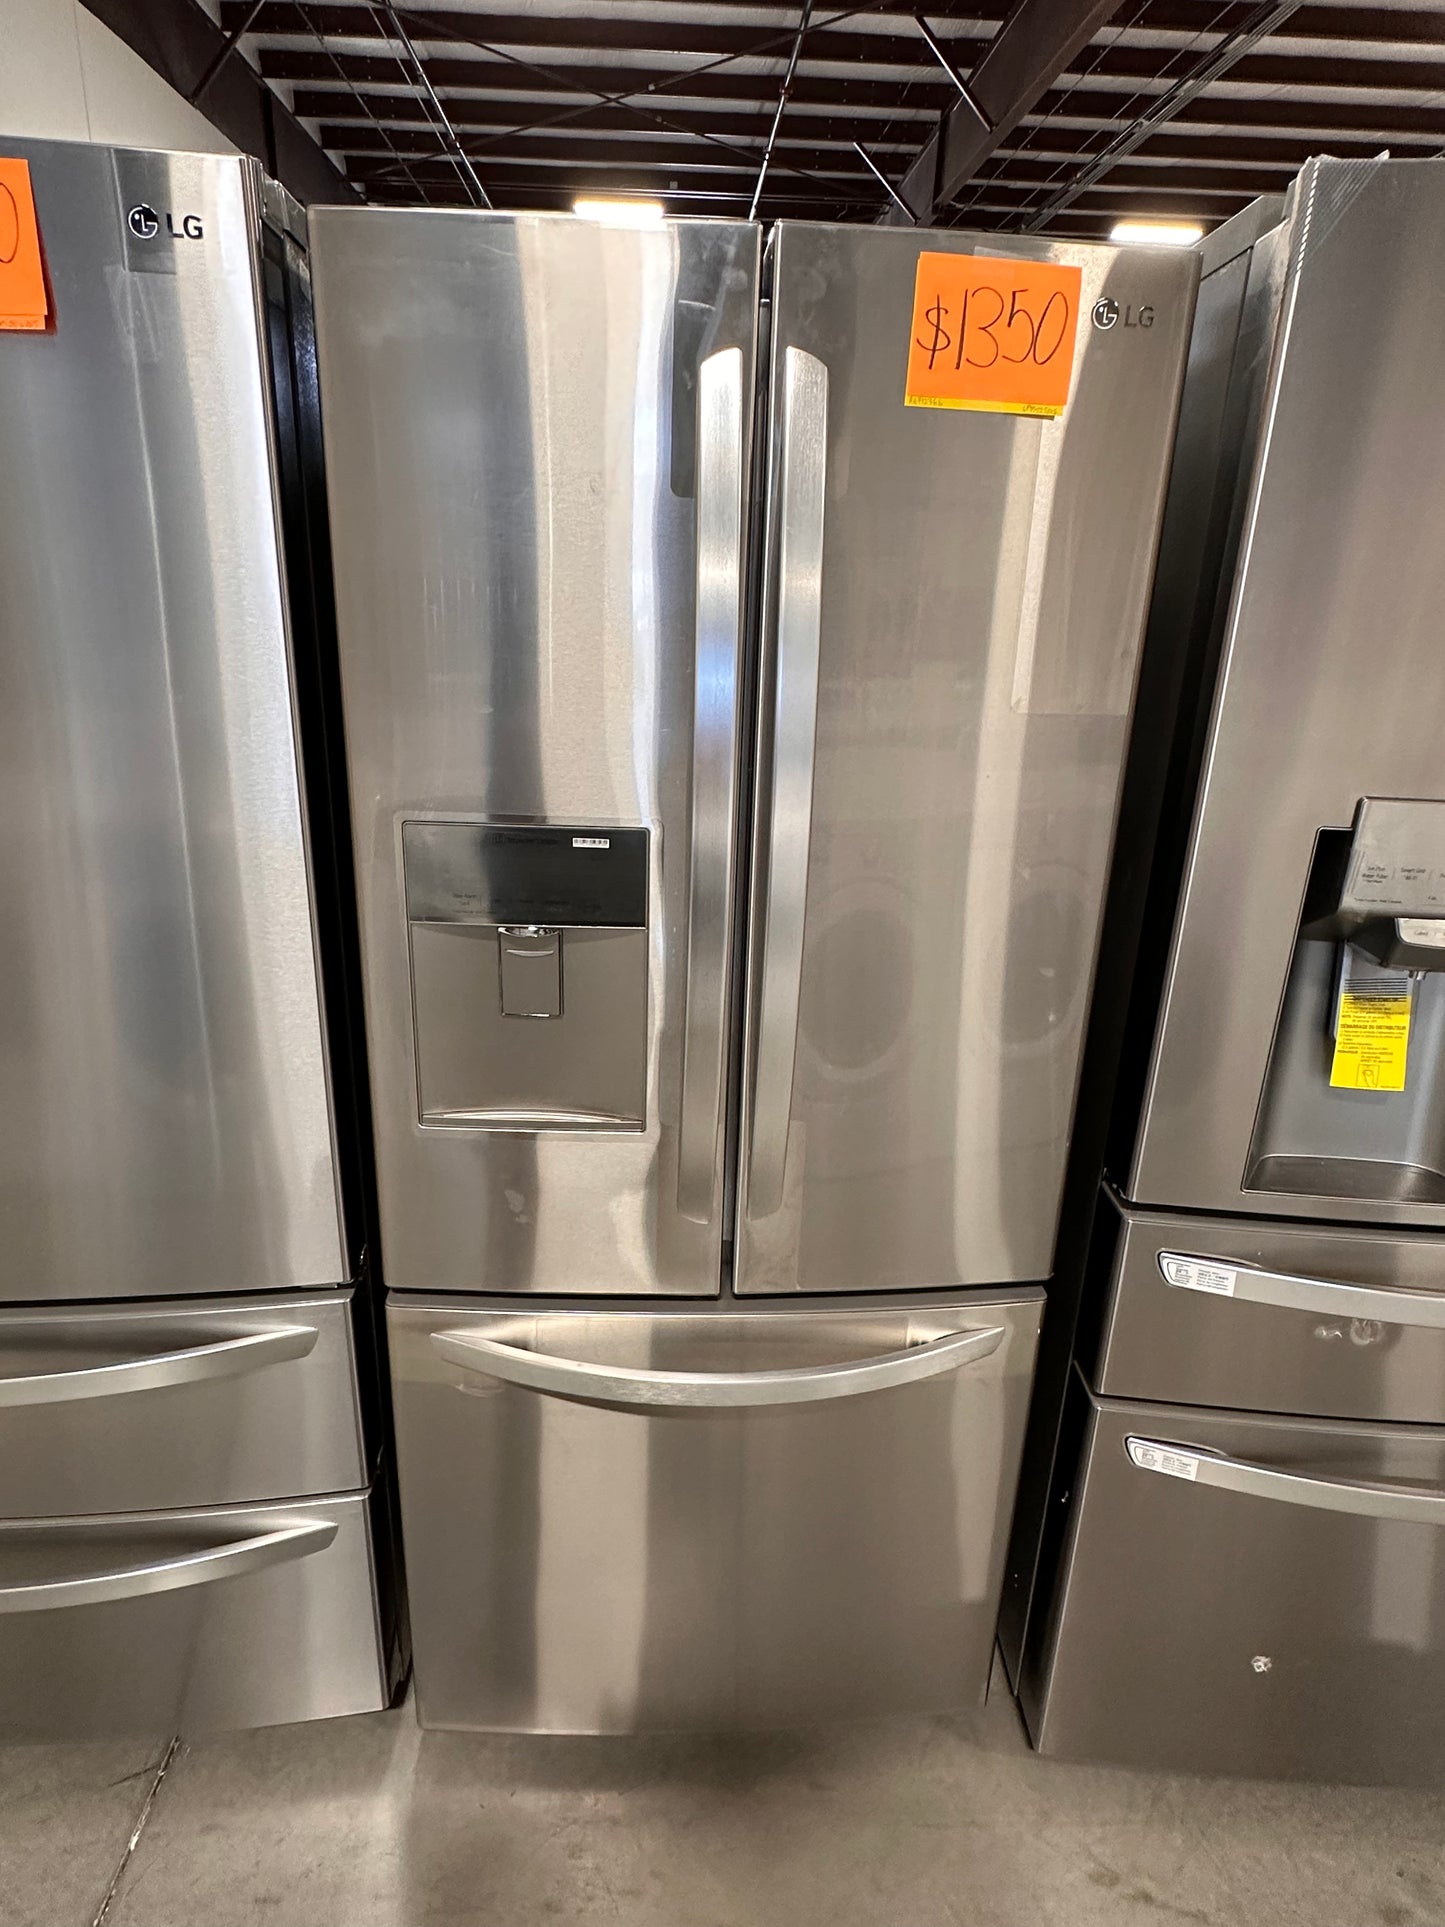 New LG - 21.8 Cu. Ft. French Door Refrigerator - Stainless steel - REF12366